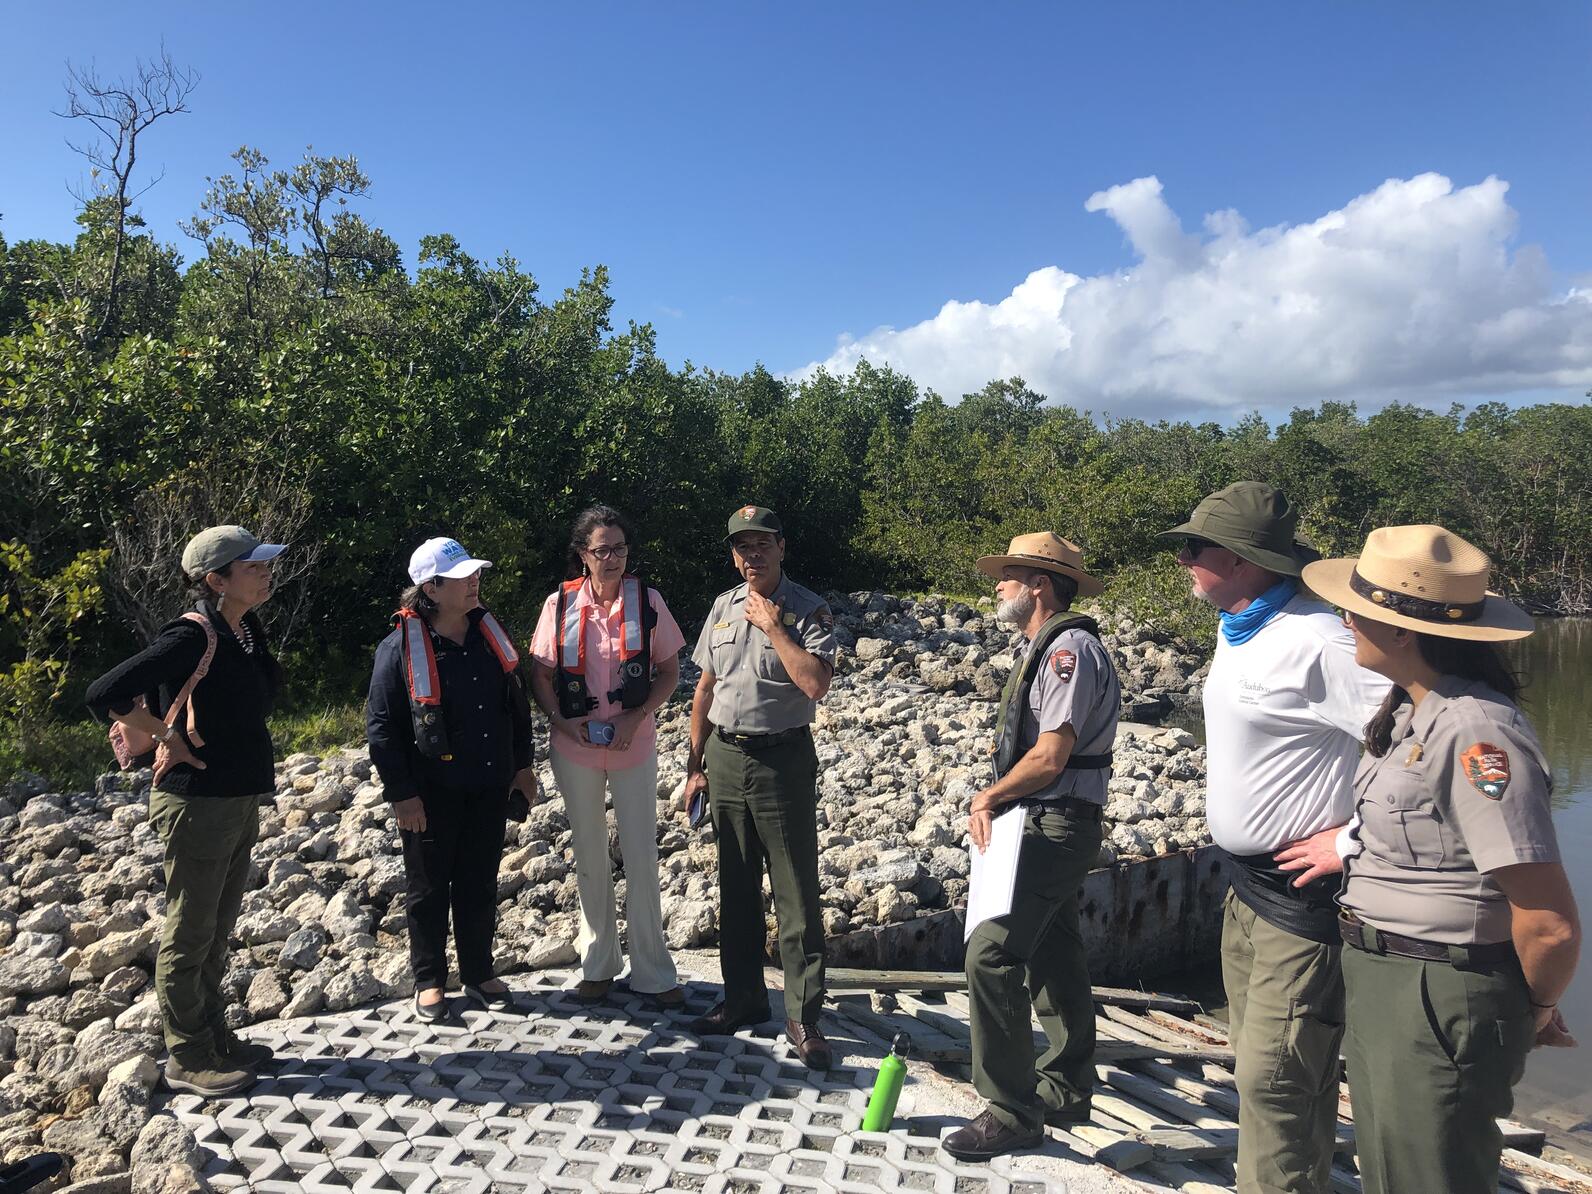 Field trip participants listen to Everglades National Park staff, standing on land.